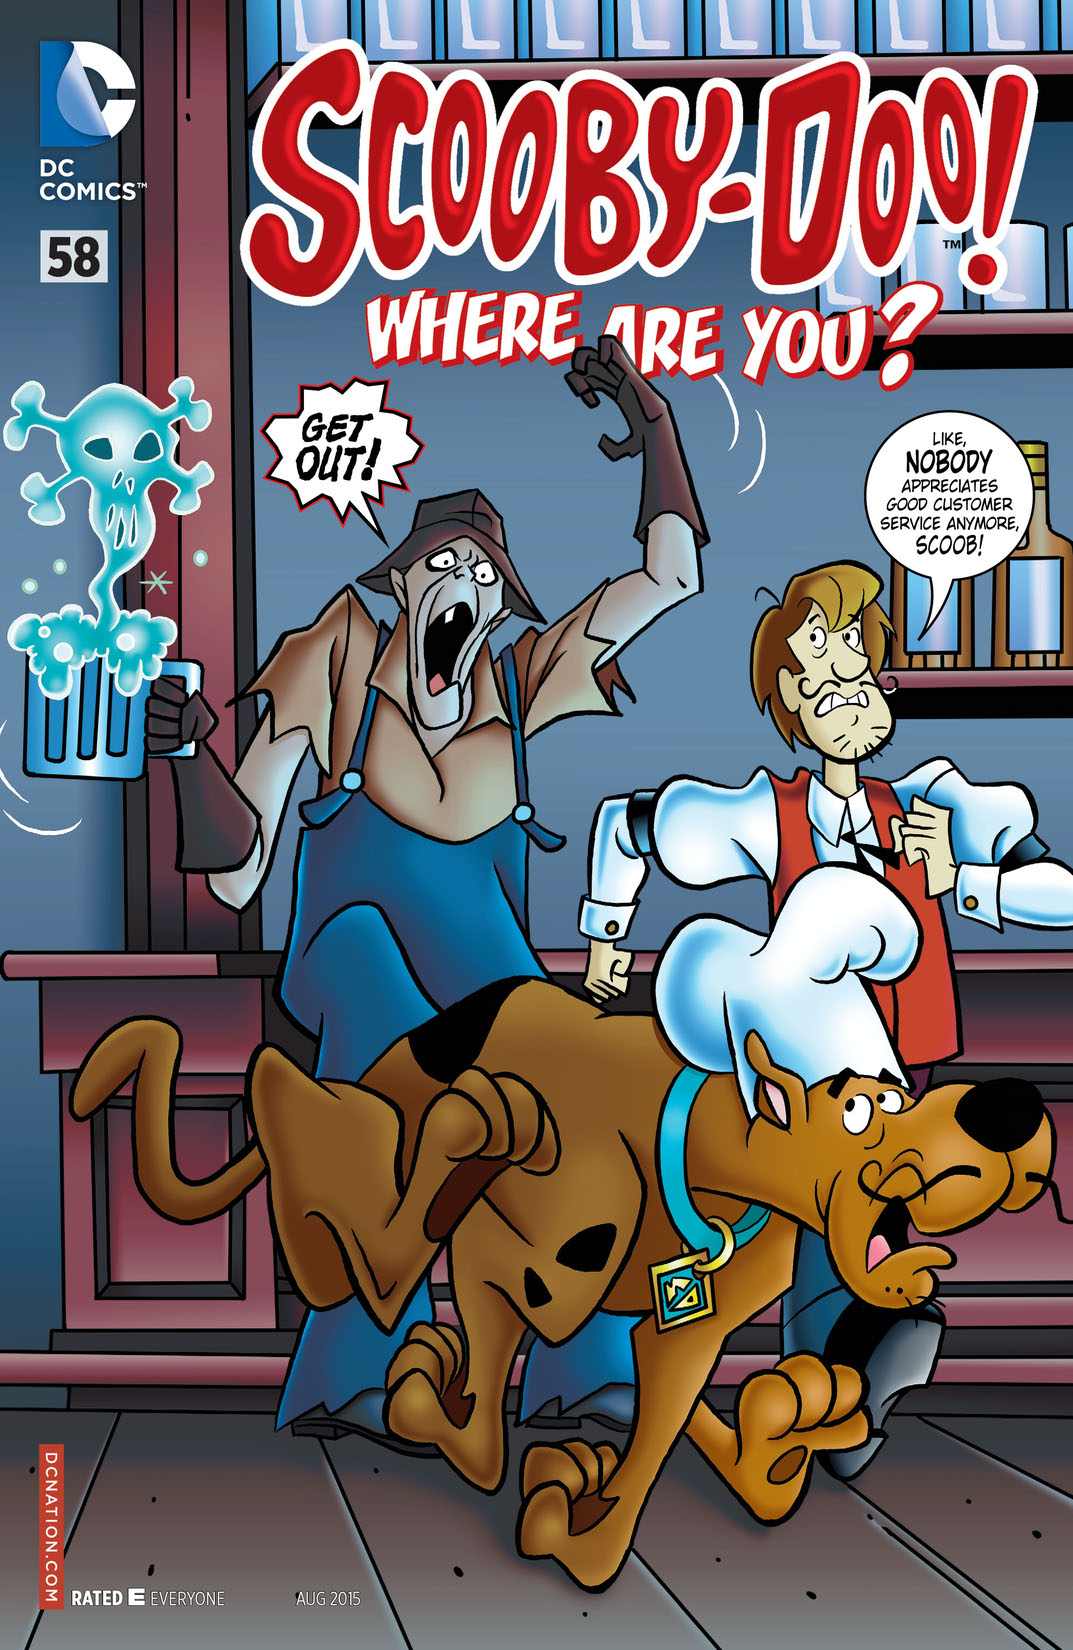 Scooby-Doo, Where Are You? #58 preview images